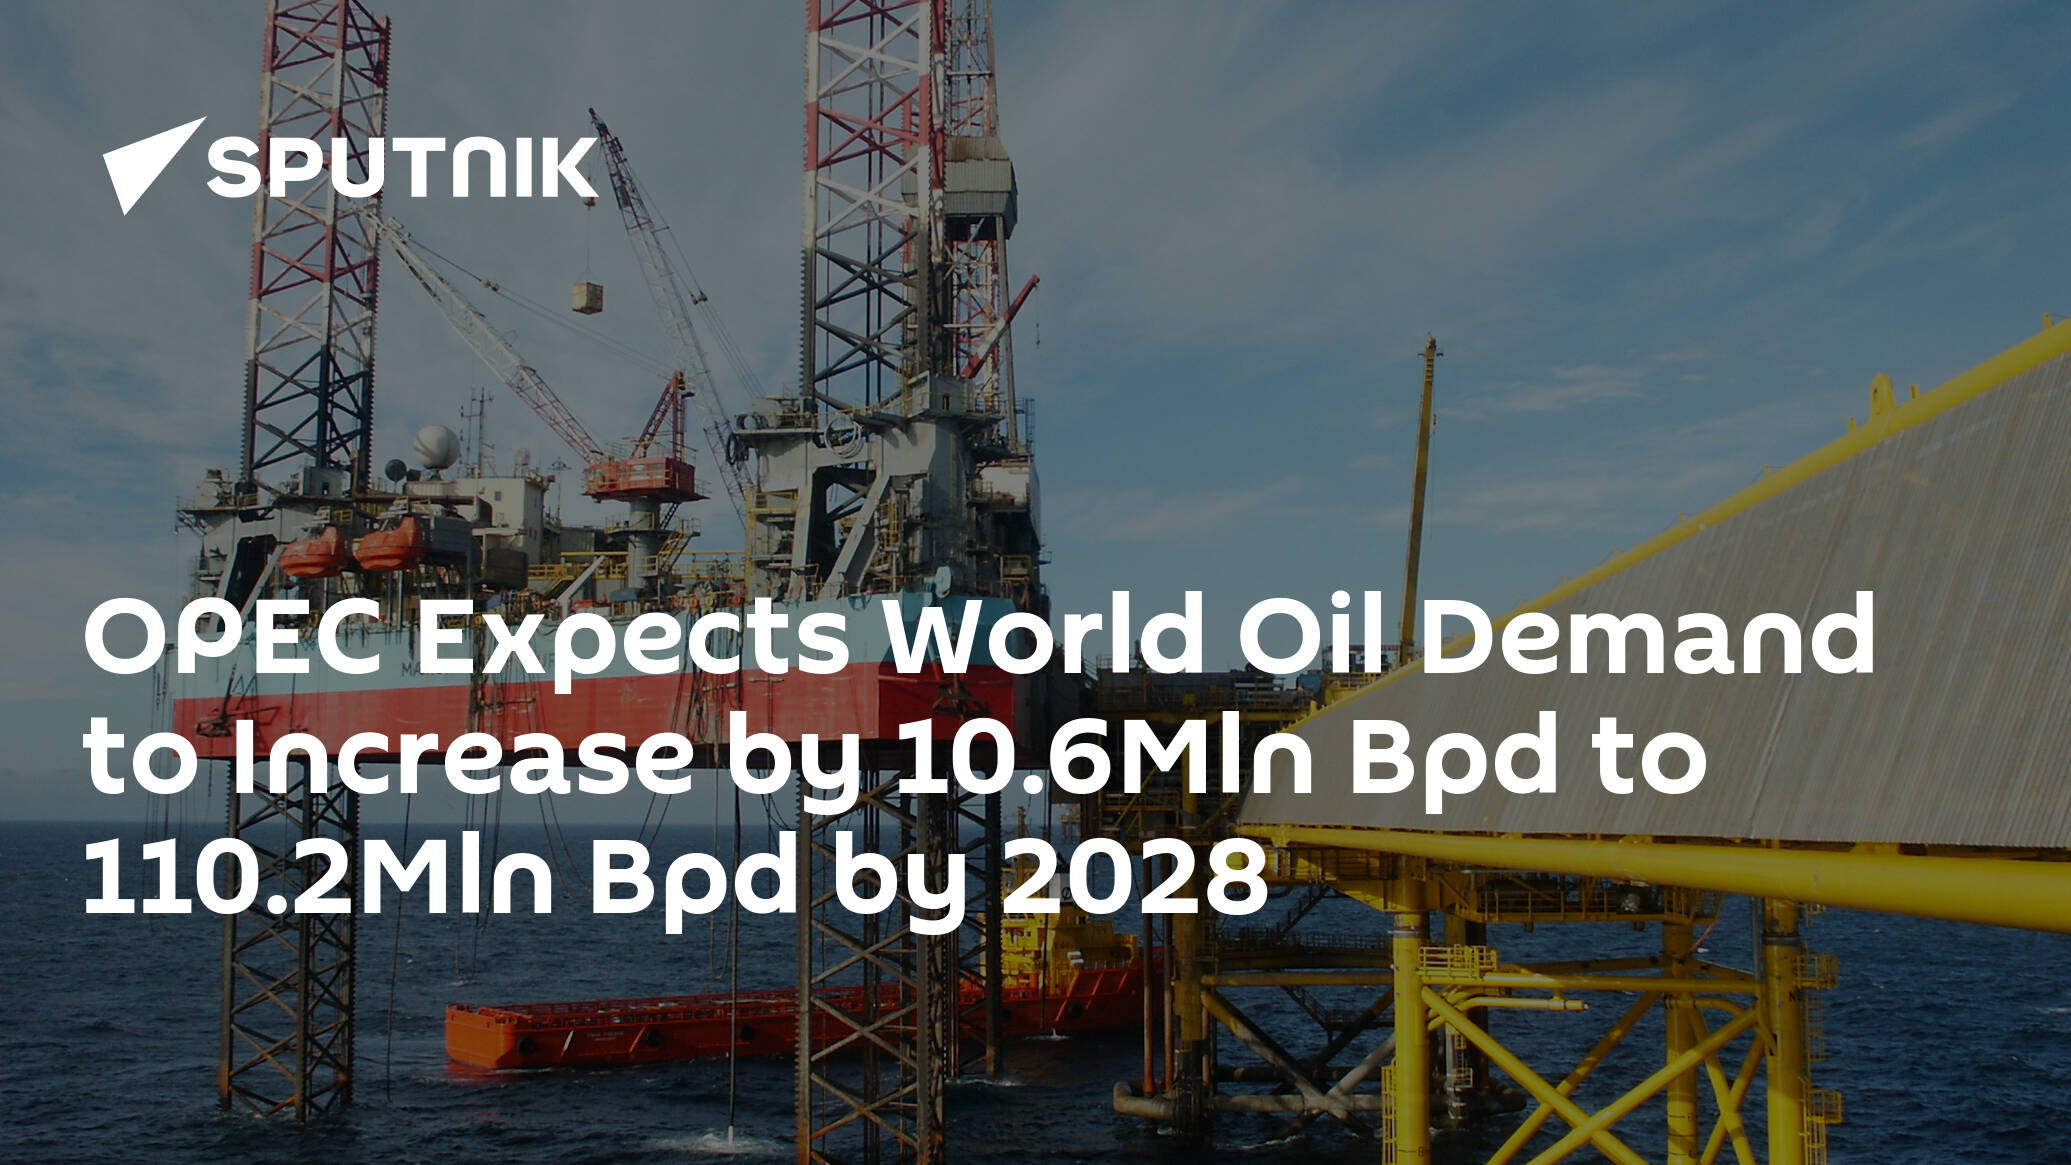 OPEC Expects World Oil Demand to Increase by 10.6Mln Bpd to 110.2Mln Bpd by 2028